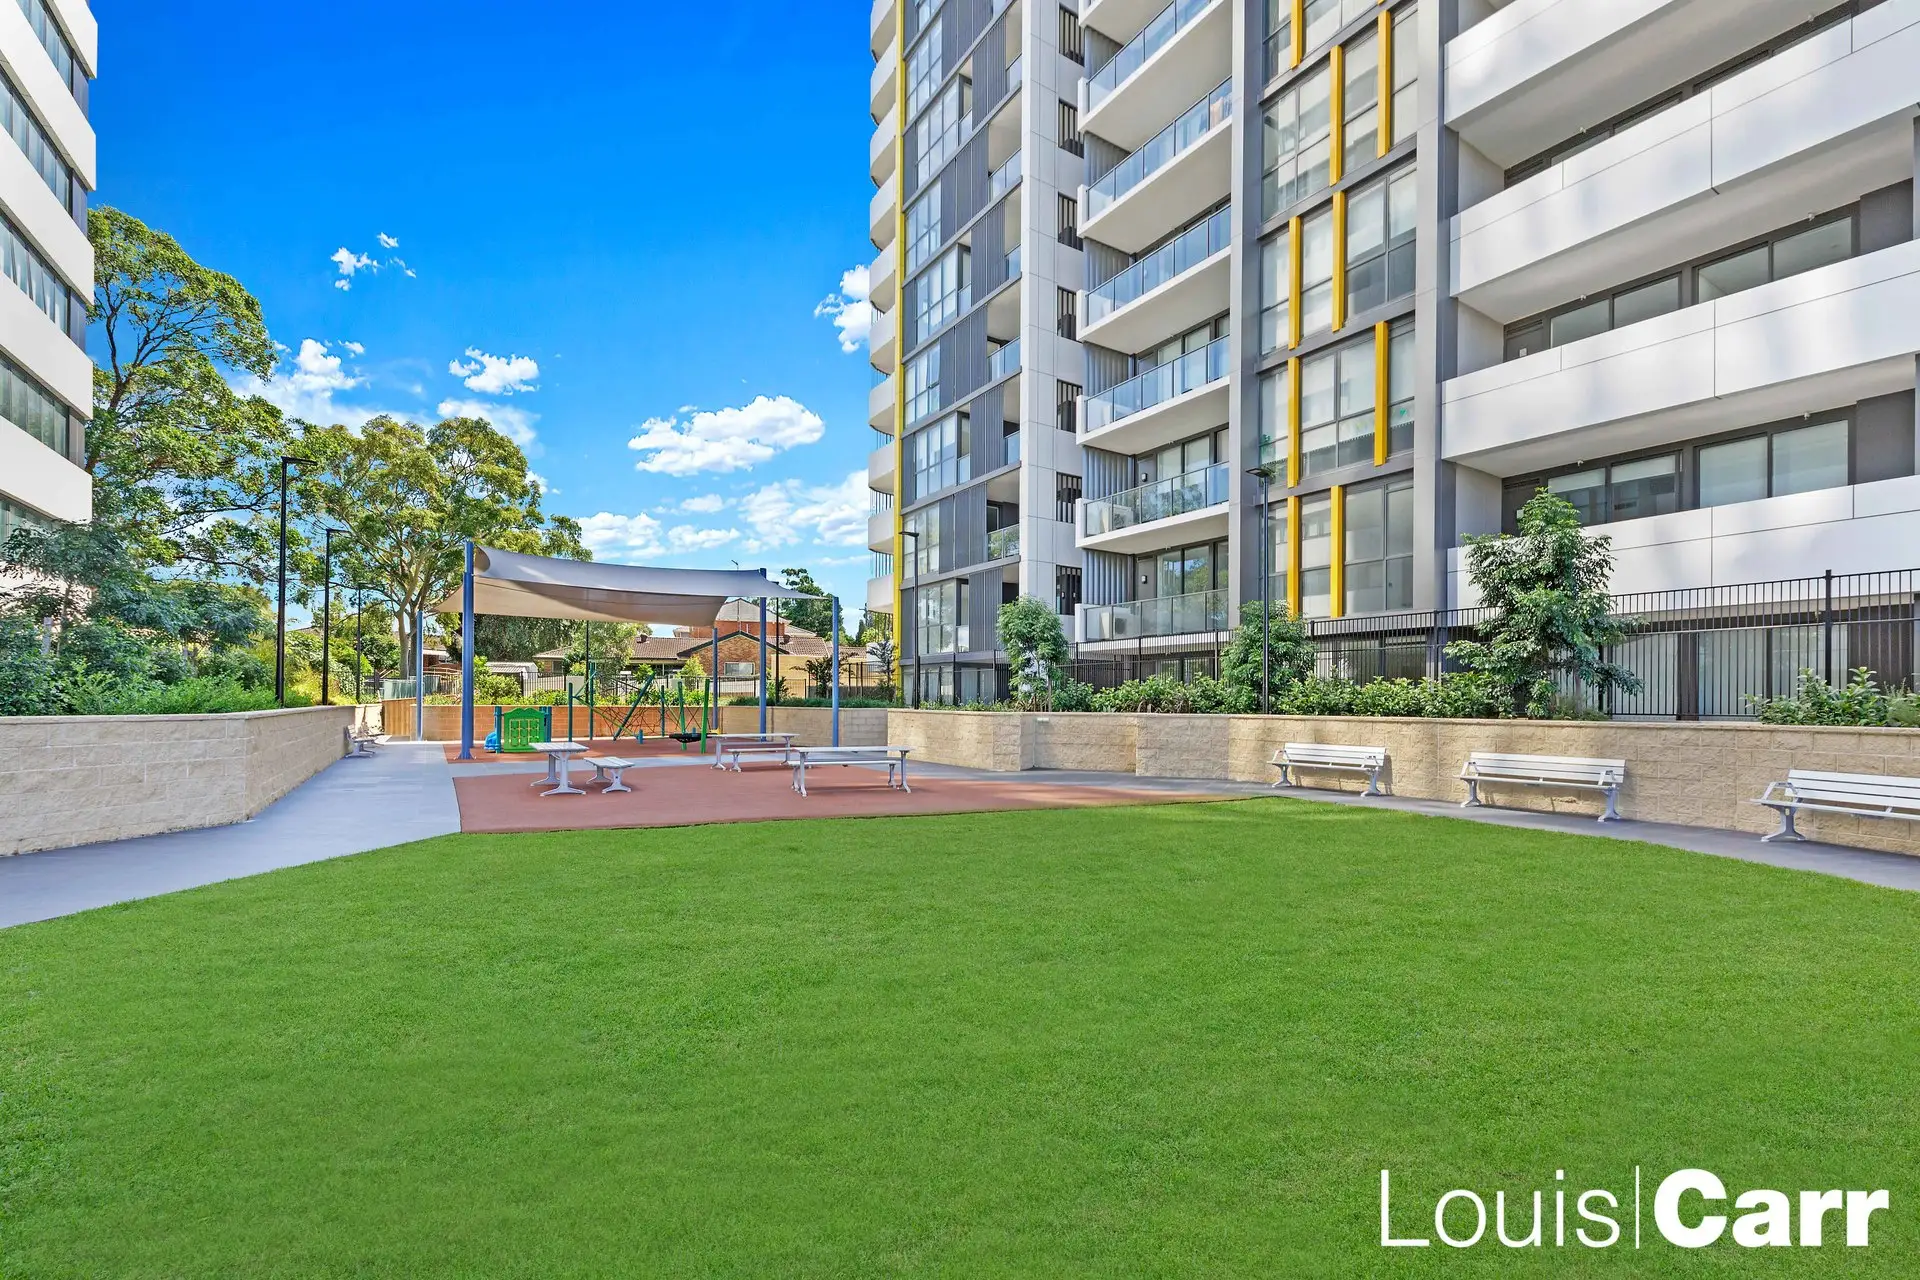 Photo #1: 1107/9 Gay Street, Castle Hill - Sold by Louis Carr Real Estate